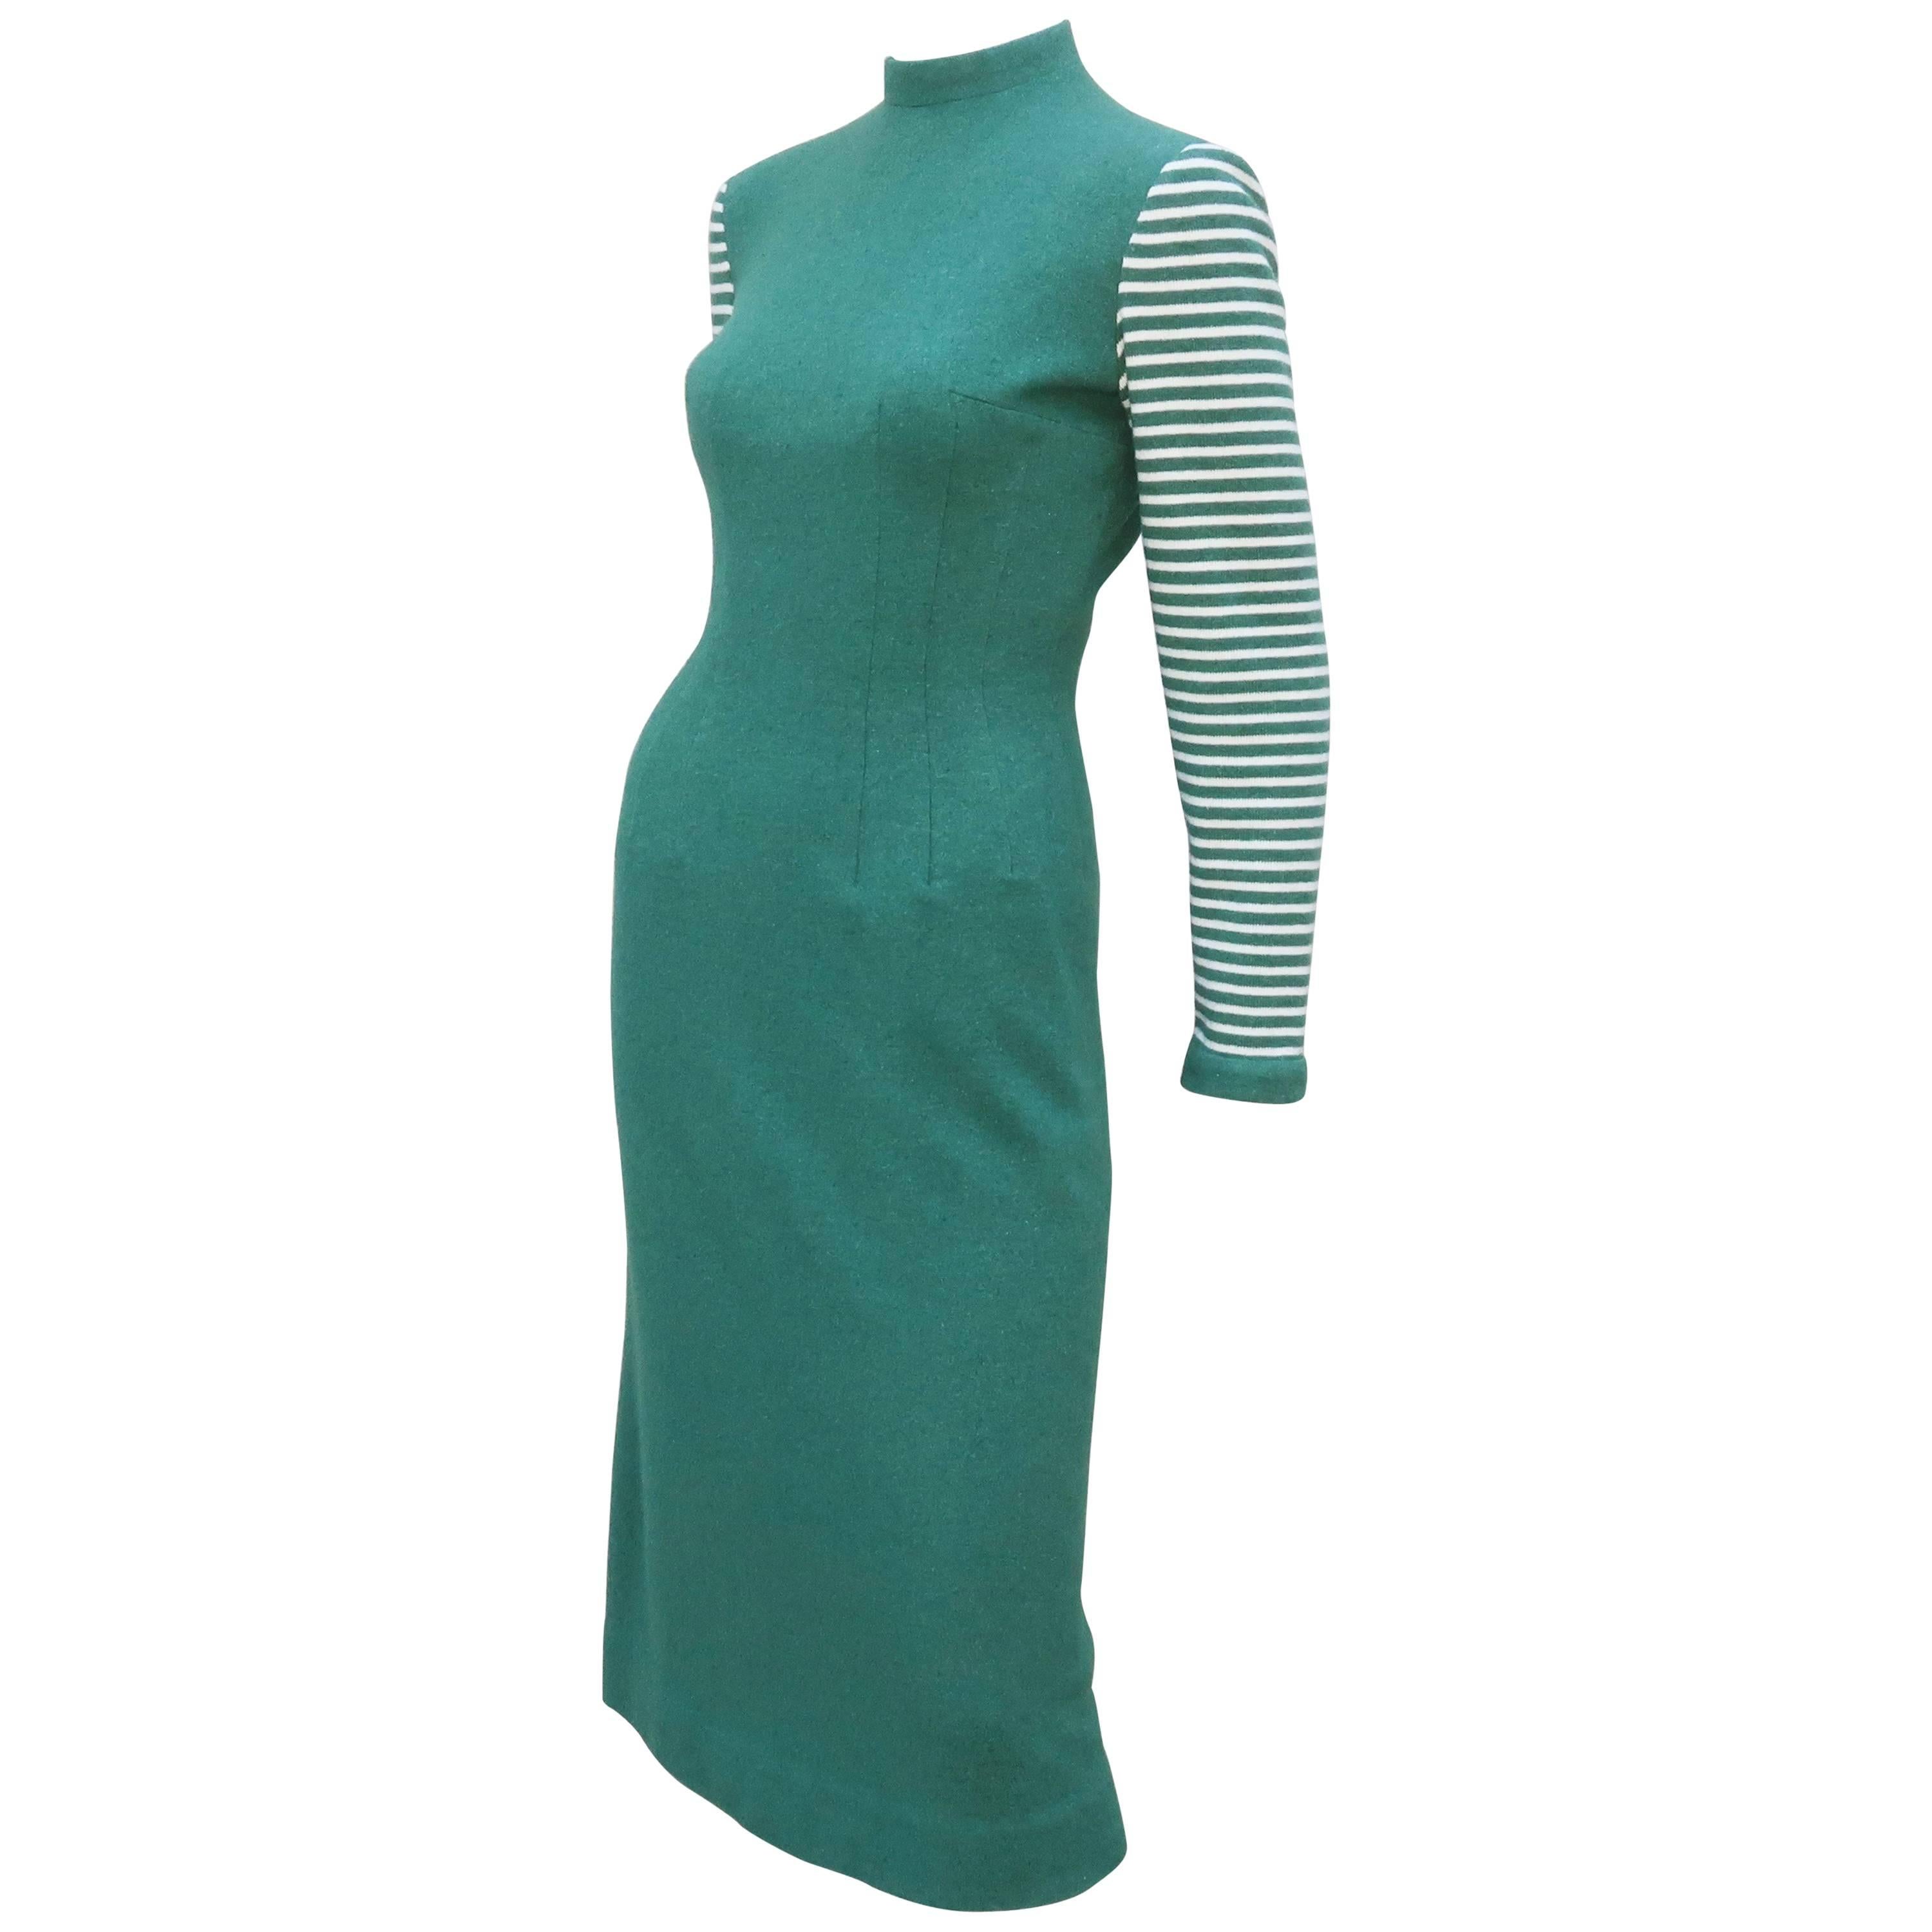 Adorable 1950's Anne Fogarty Green & White Wool Sweater Dress